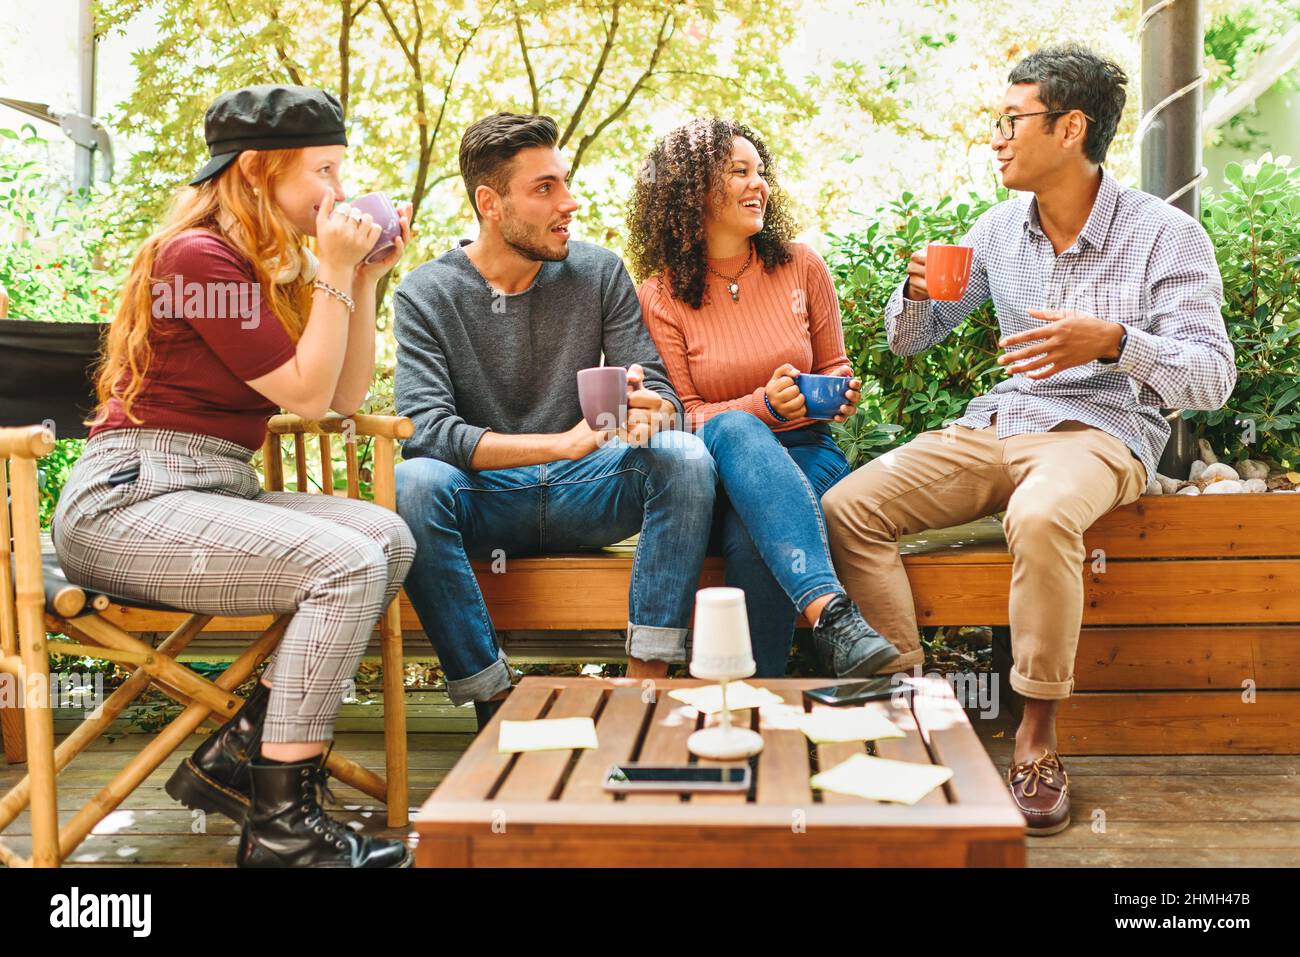 Group of multicultural young friends hanging out on a patio chilling together over mugs of coffee laughing and joking against a high key background Stock Photo